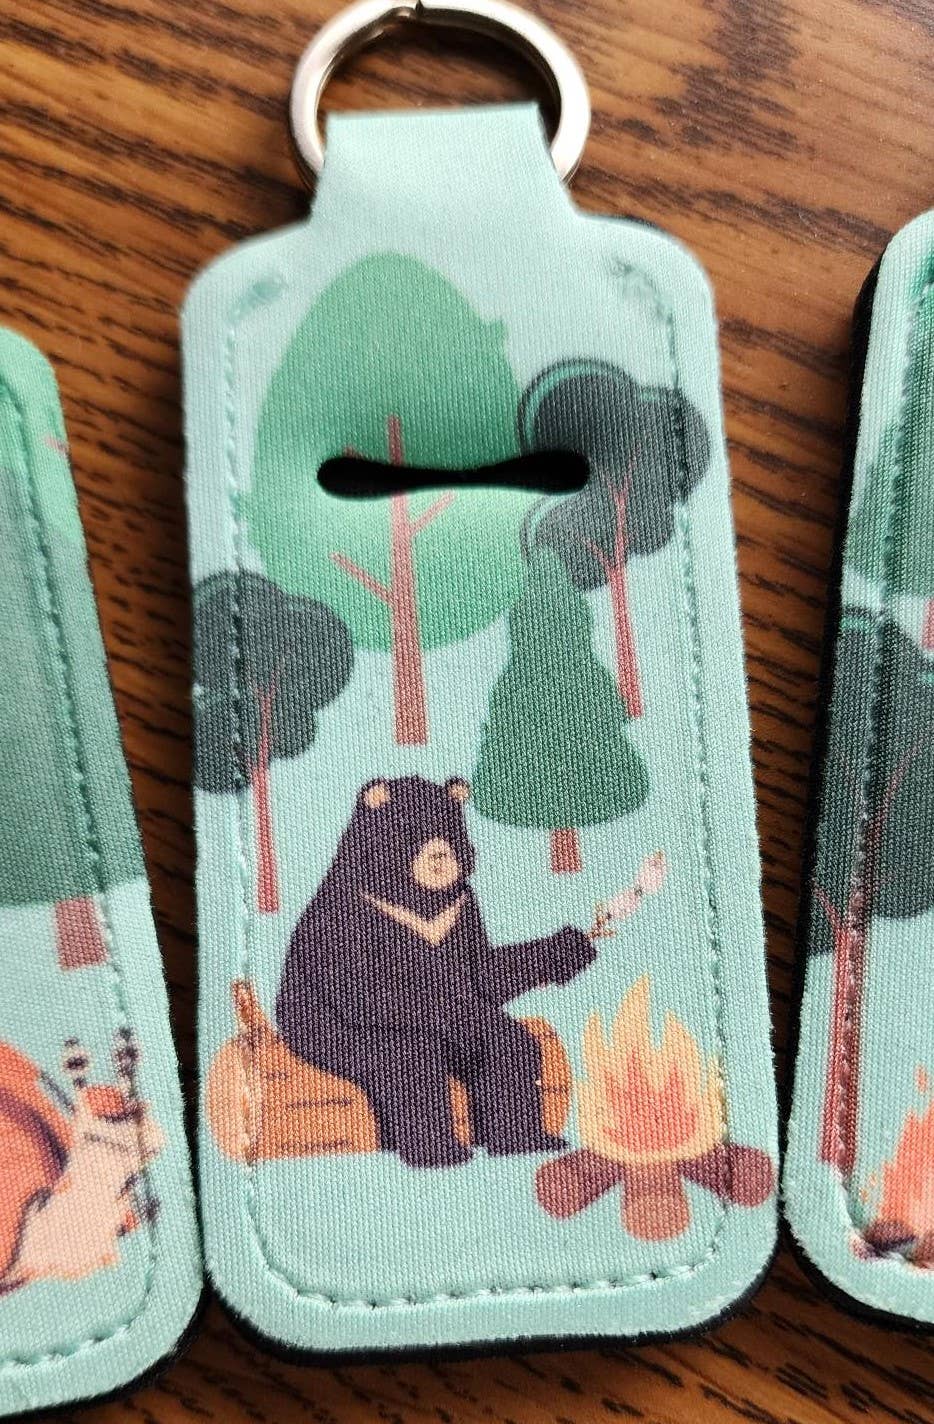 Neopreme chapstick holder keychain with bear roasting marshmallows by a campfire